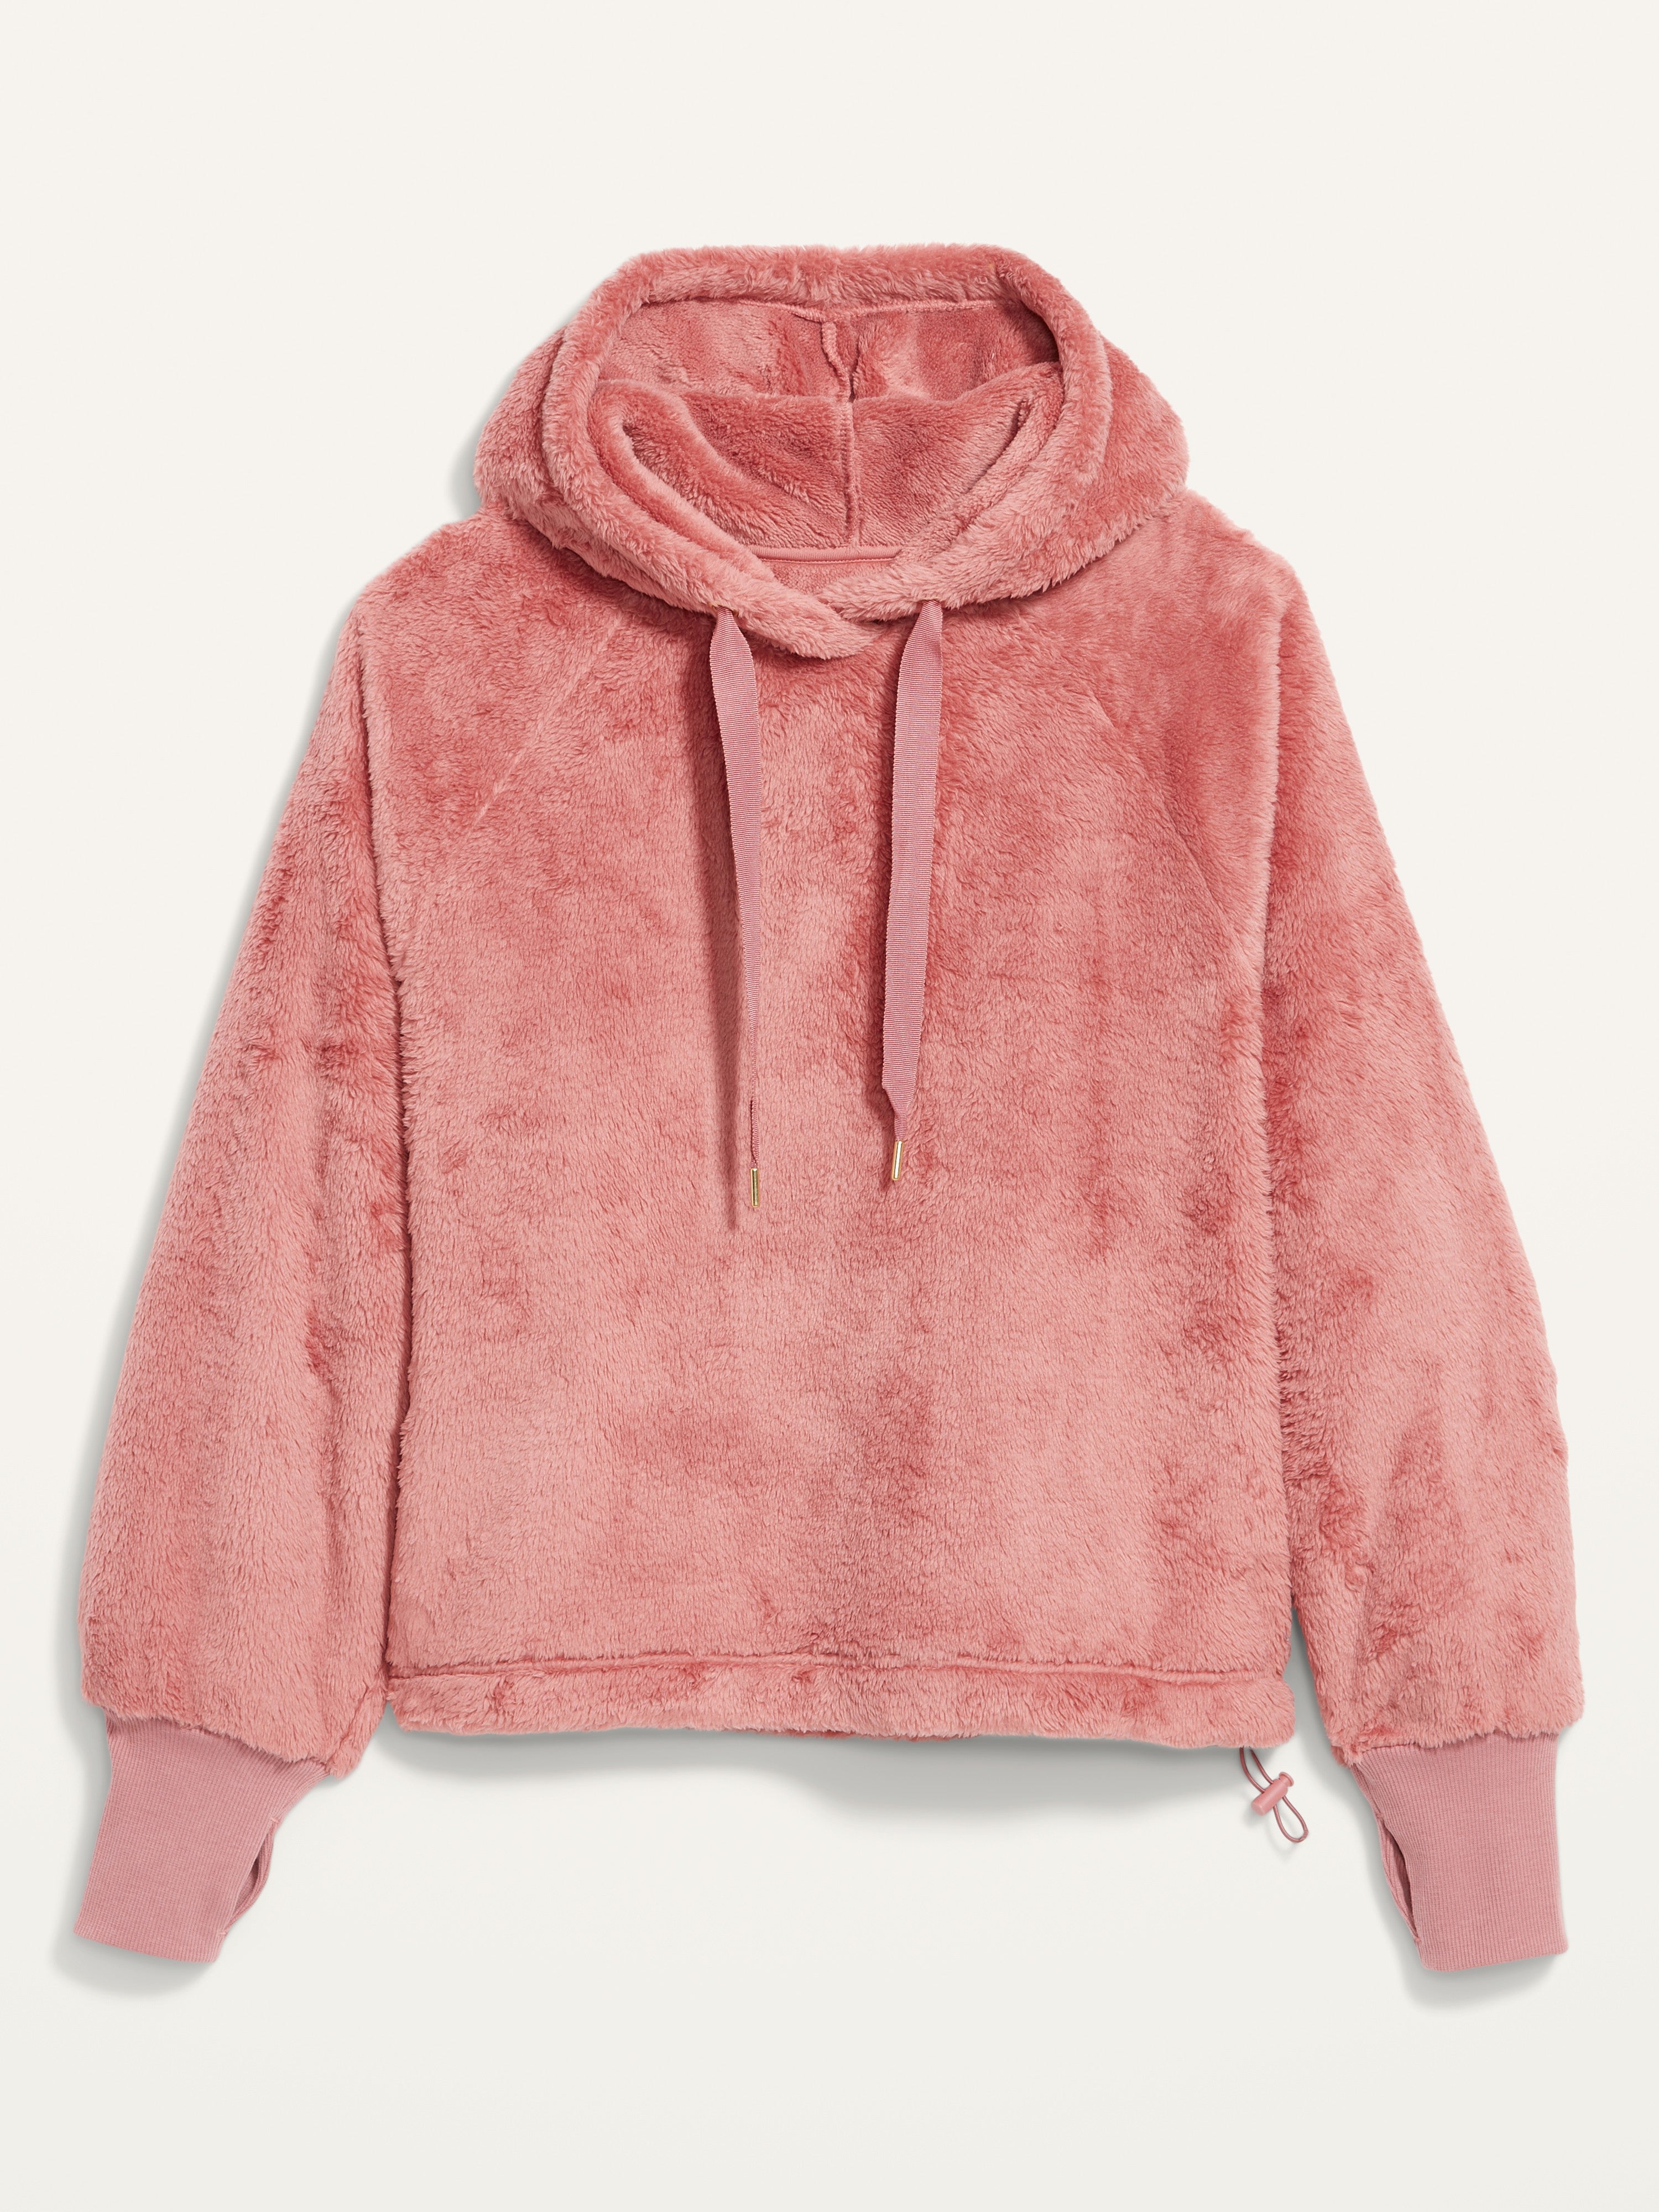 Fuzzy pink hoodie